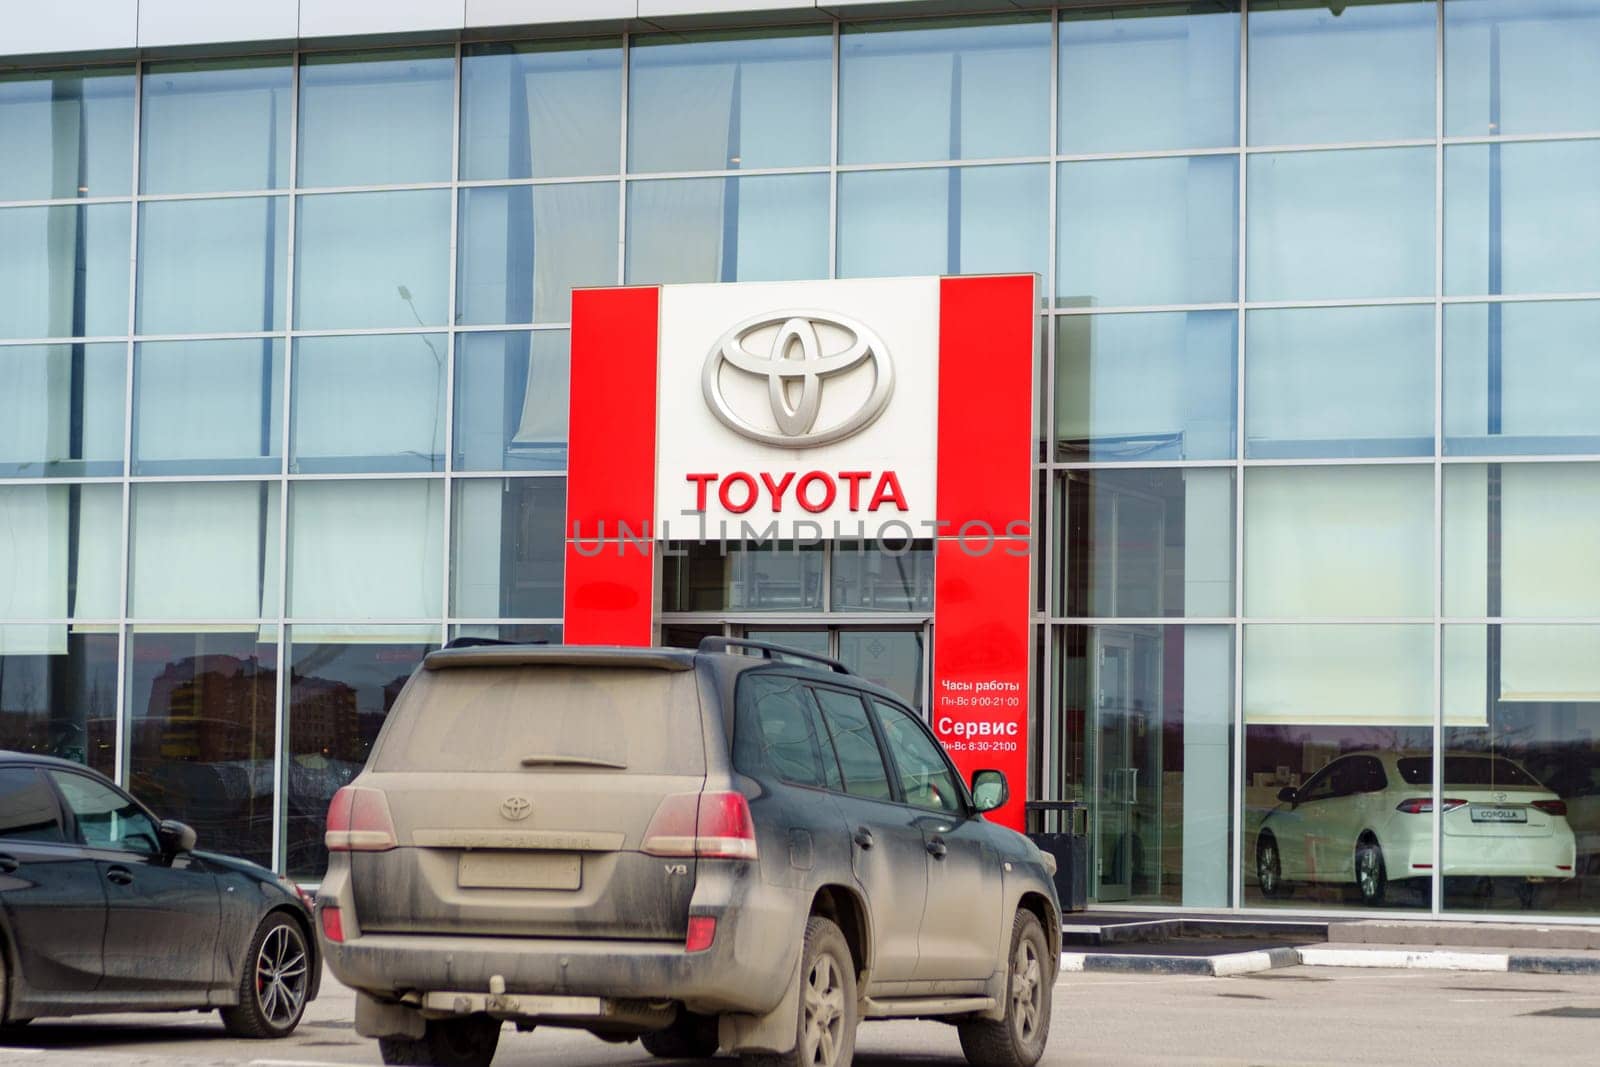 Tyumen, Russia-March 02, 2024: Toyota brand logo sign prominently displayed on the side of a commercial building in a city. by darksoul72